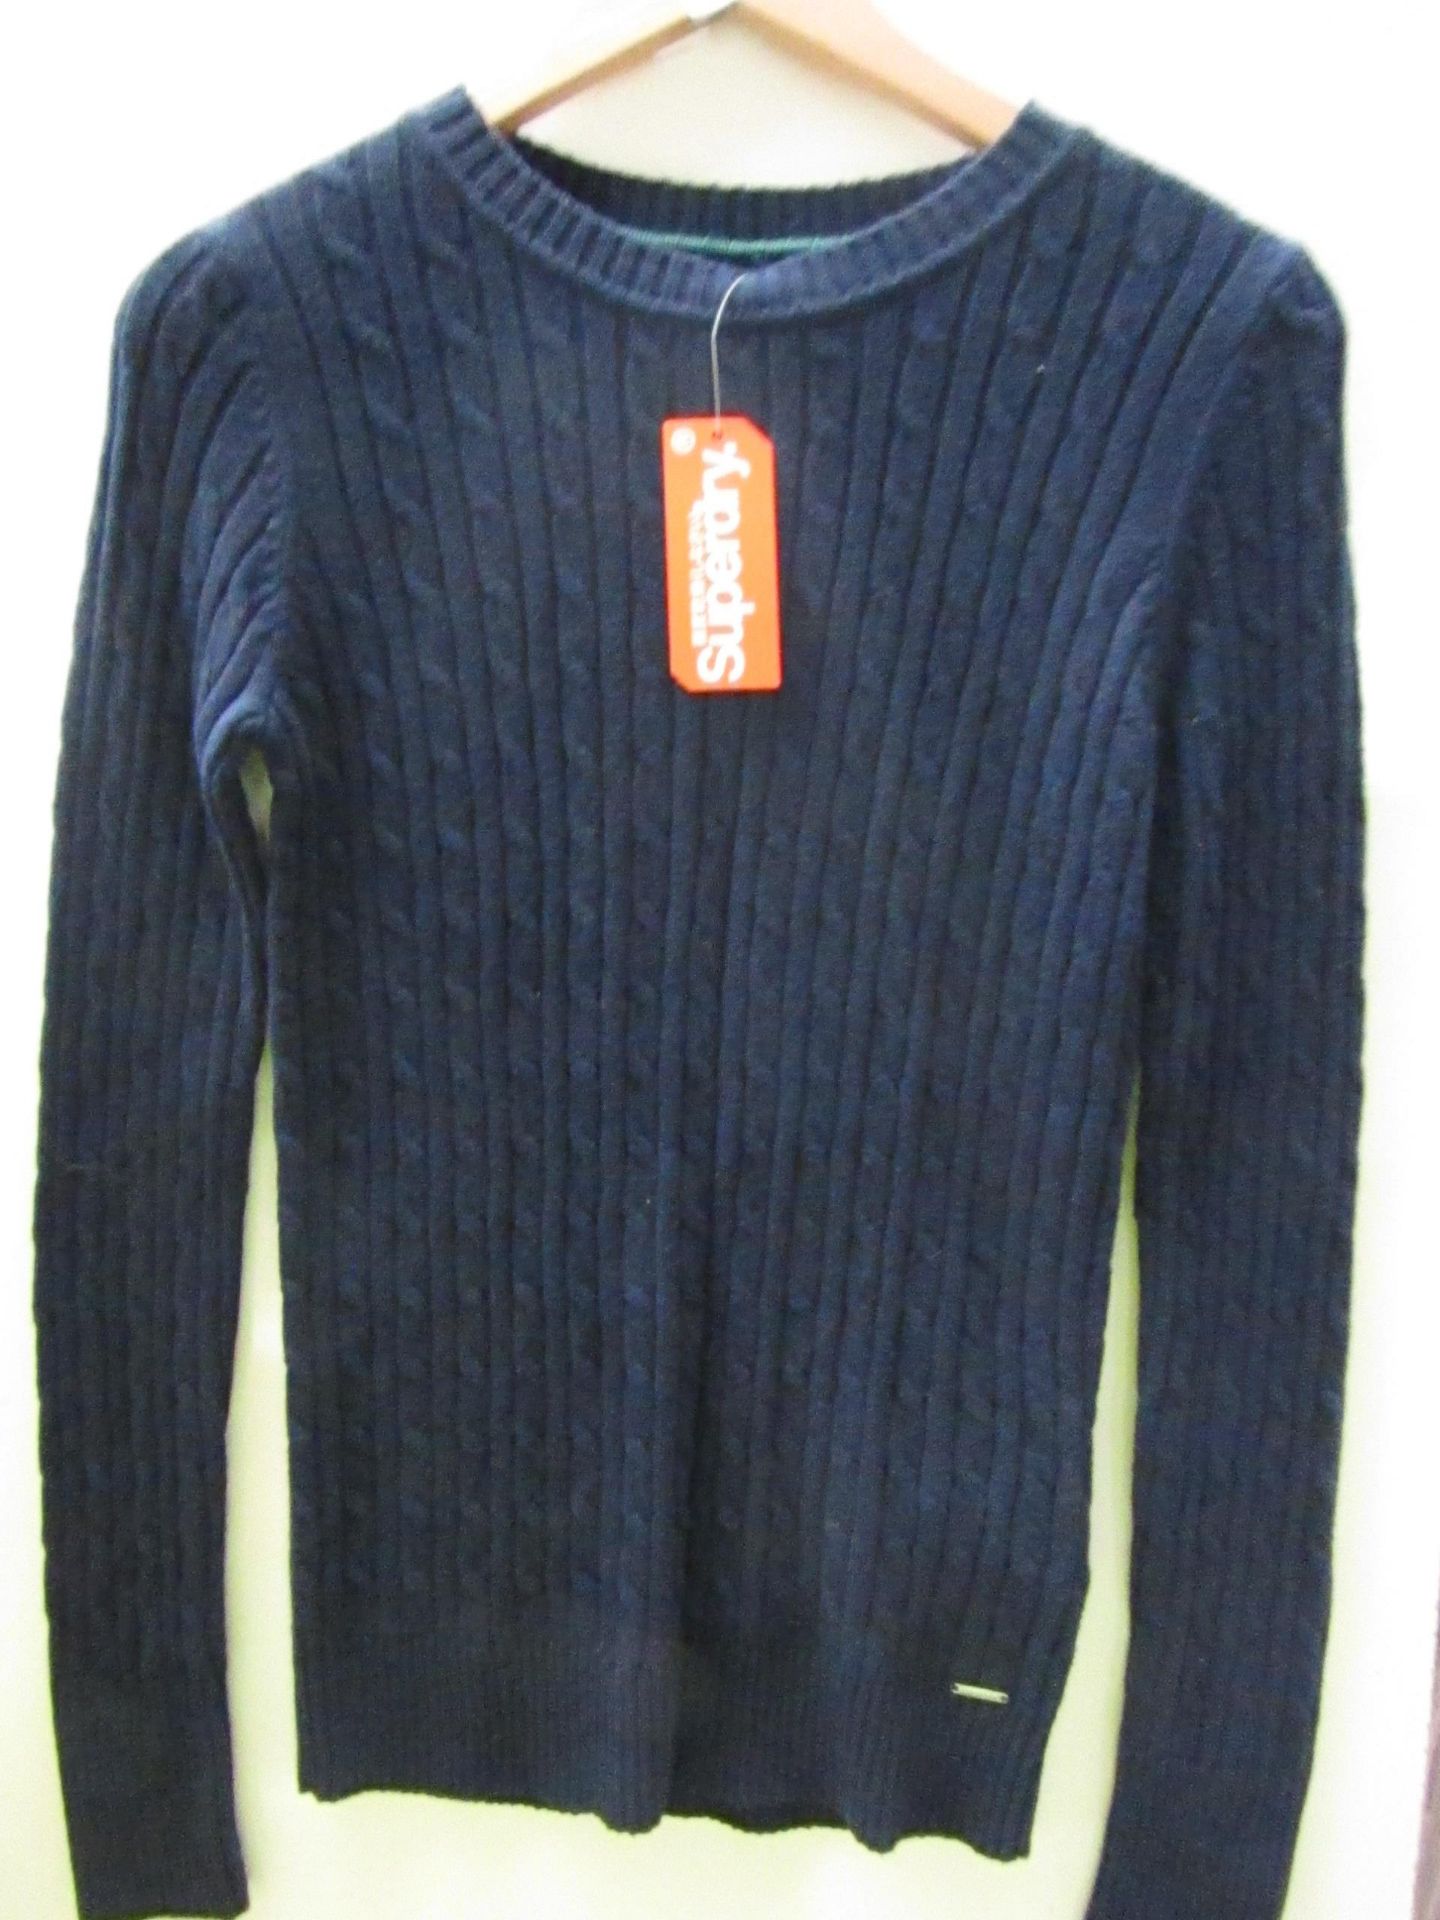 Superdry Jumper Navy Size S New With Tags RRP £45